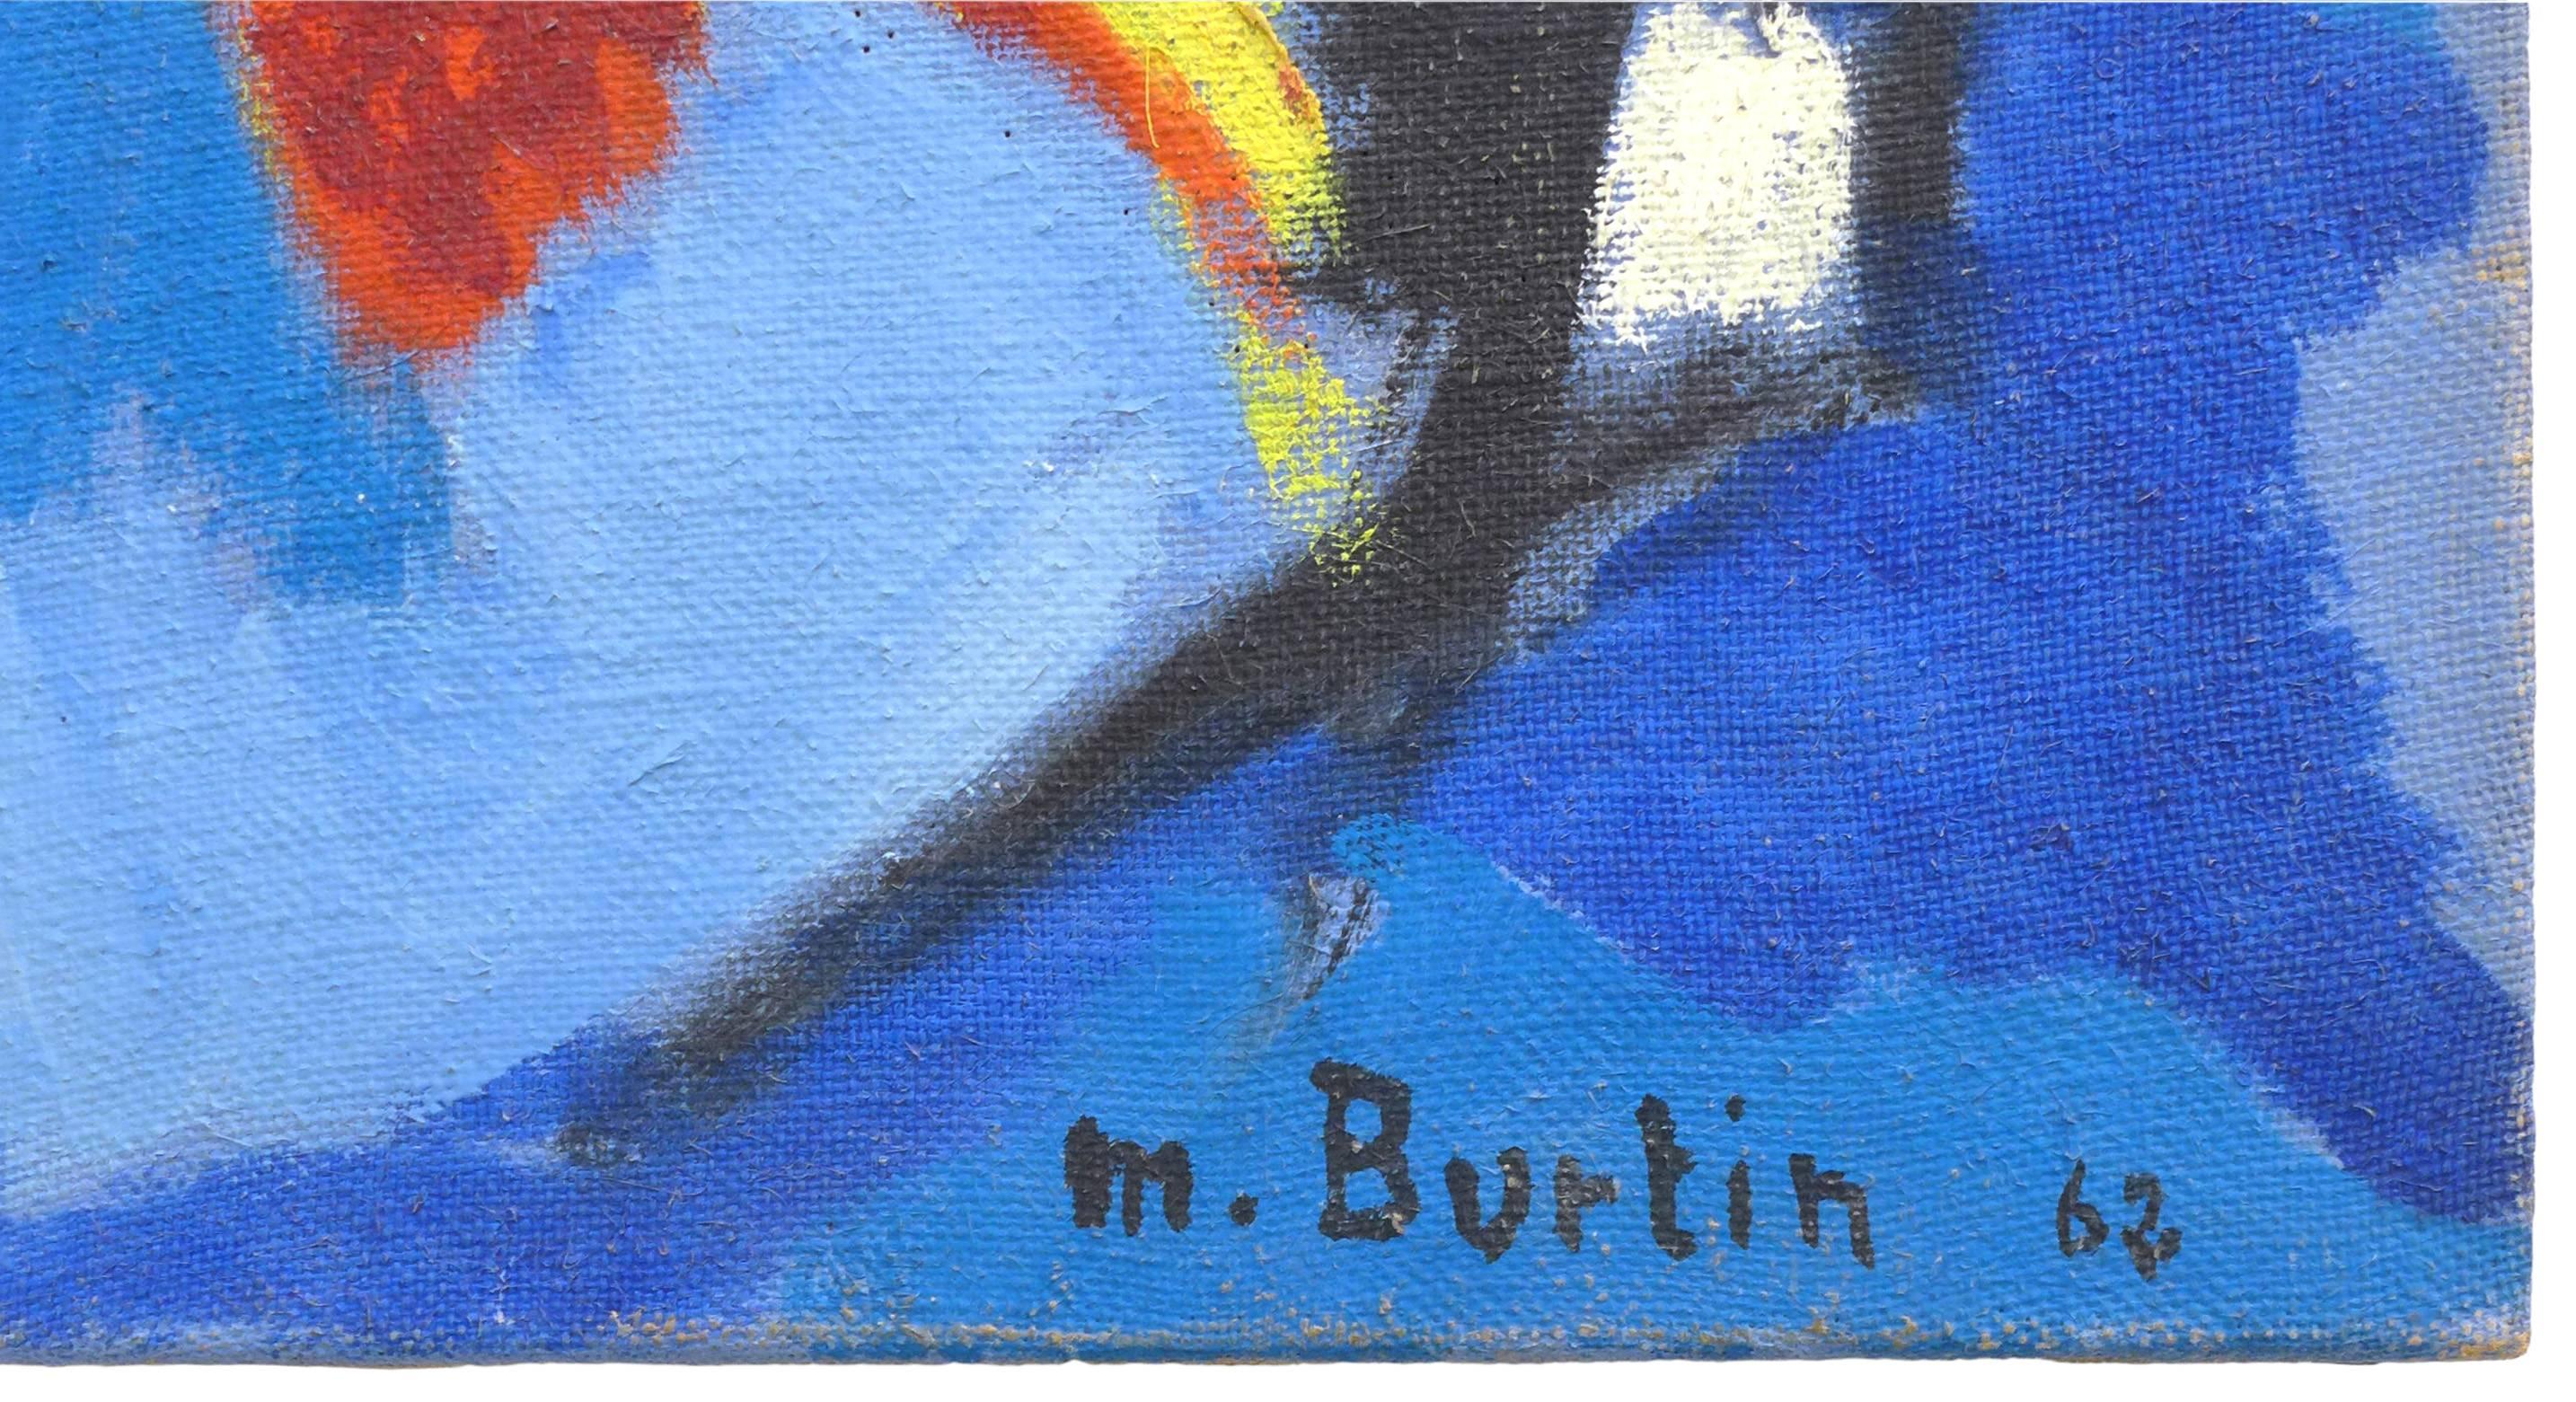 An exceptional, abstract-composition painting by École de Paris artist Marcel Burtin. A beautifully-vibrant, blues-dominant blaze executed in the early 1960s by this prolific, acclaimed French painter. Burtin's illustrious career overlapped both the